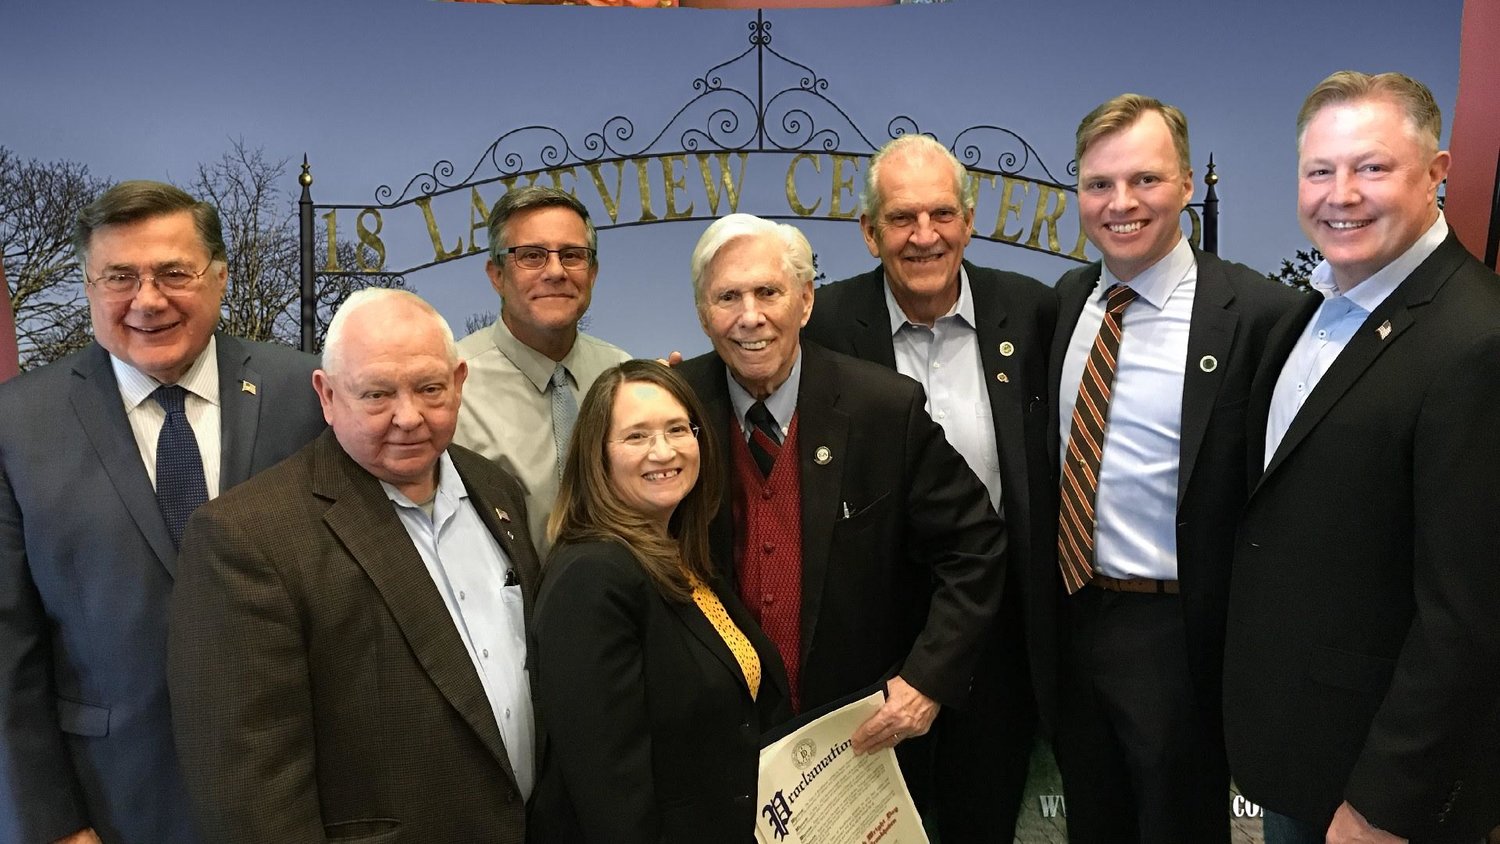 From left to right: Supervisor Ed Romaine, Legis. Dominick Thorne, Ralph Wright, trustee Tom Ferb, trustee Patrick McHeffey, councilman Neil Foley. Front row:  Bill Doyle, representing Sen. Alexis Weik; Marian H. Russo, chair of Friends of Lakeview Cemetery.